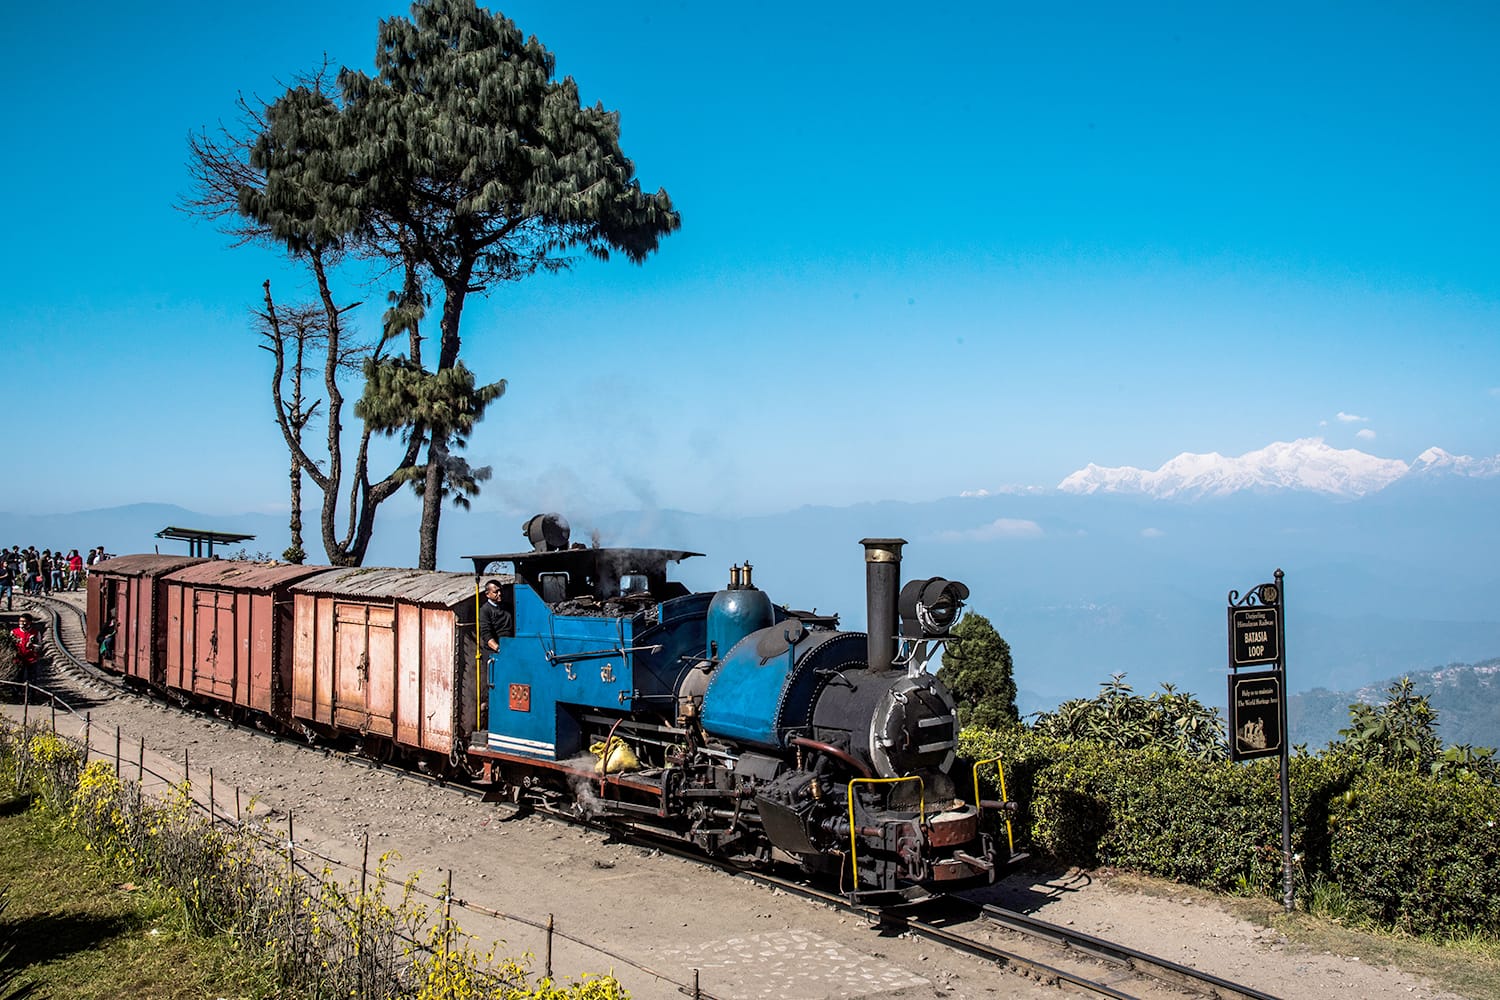 Darjeeling Himalayan Railway, also known as the DHR or "Toy Train".